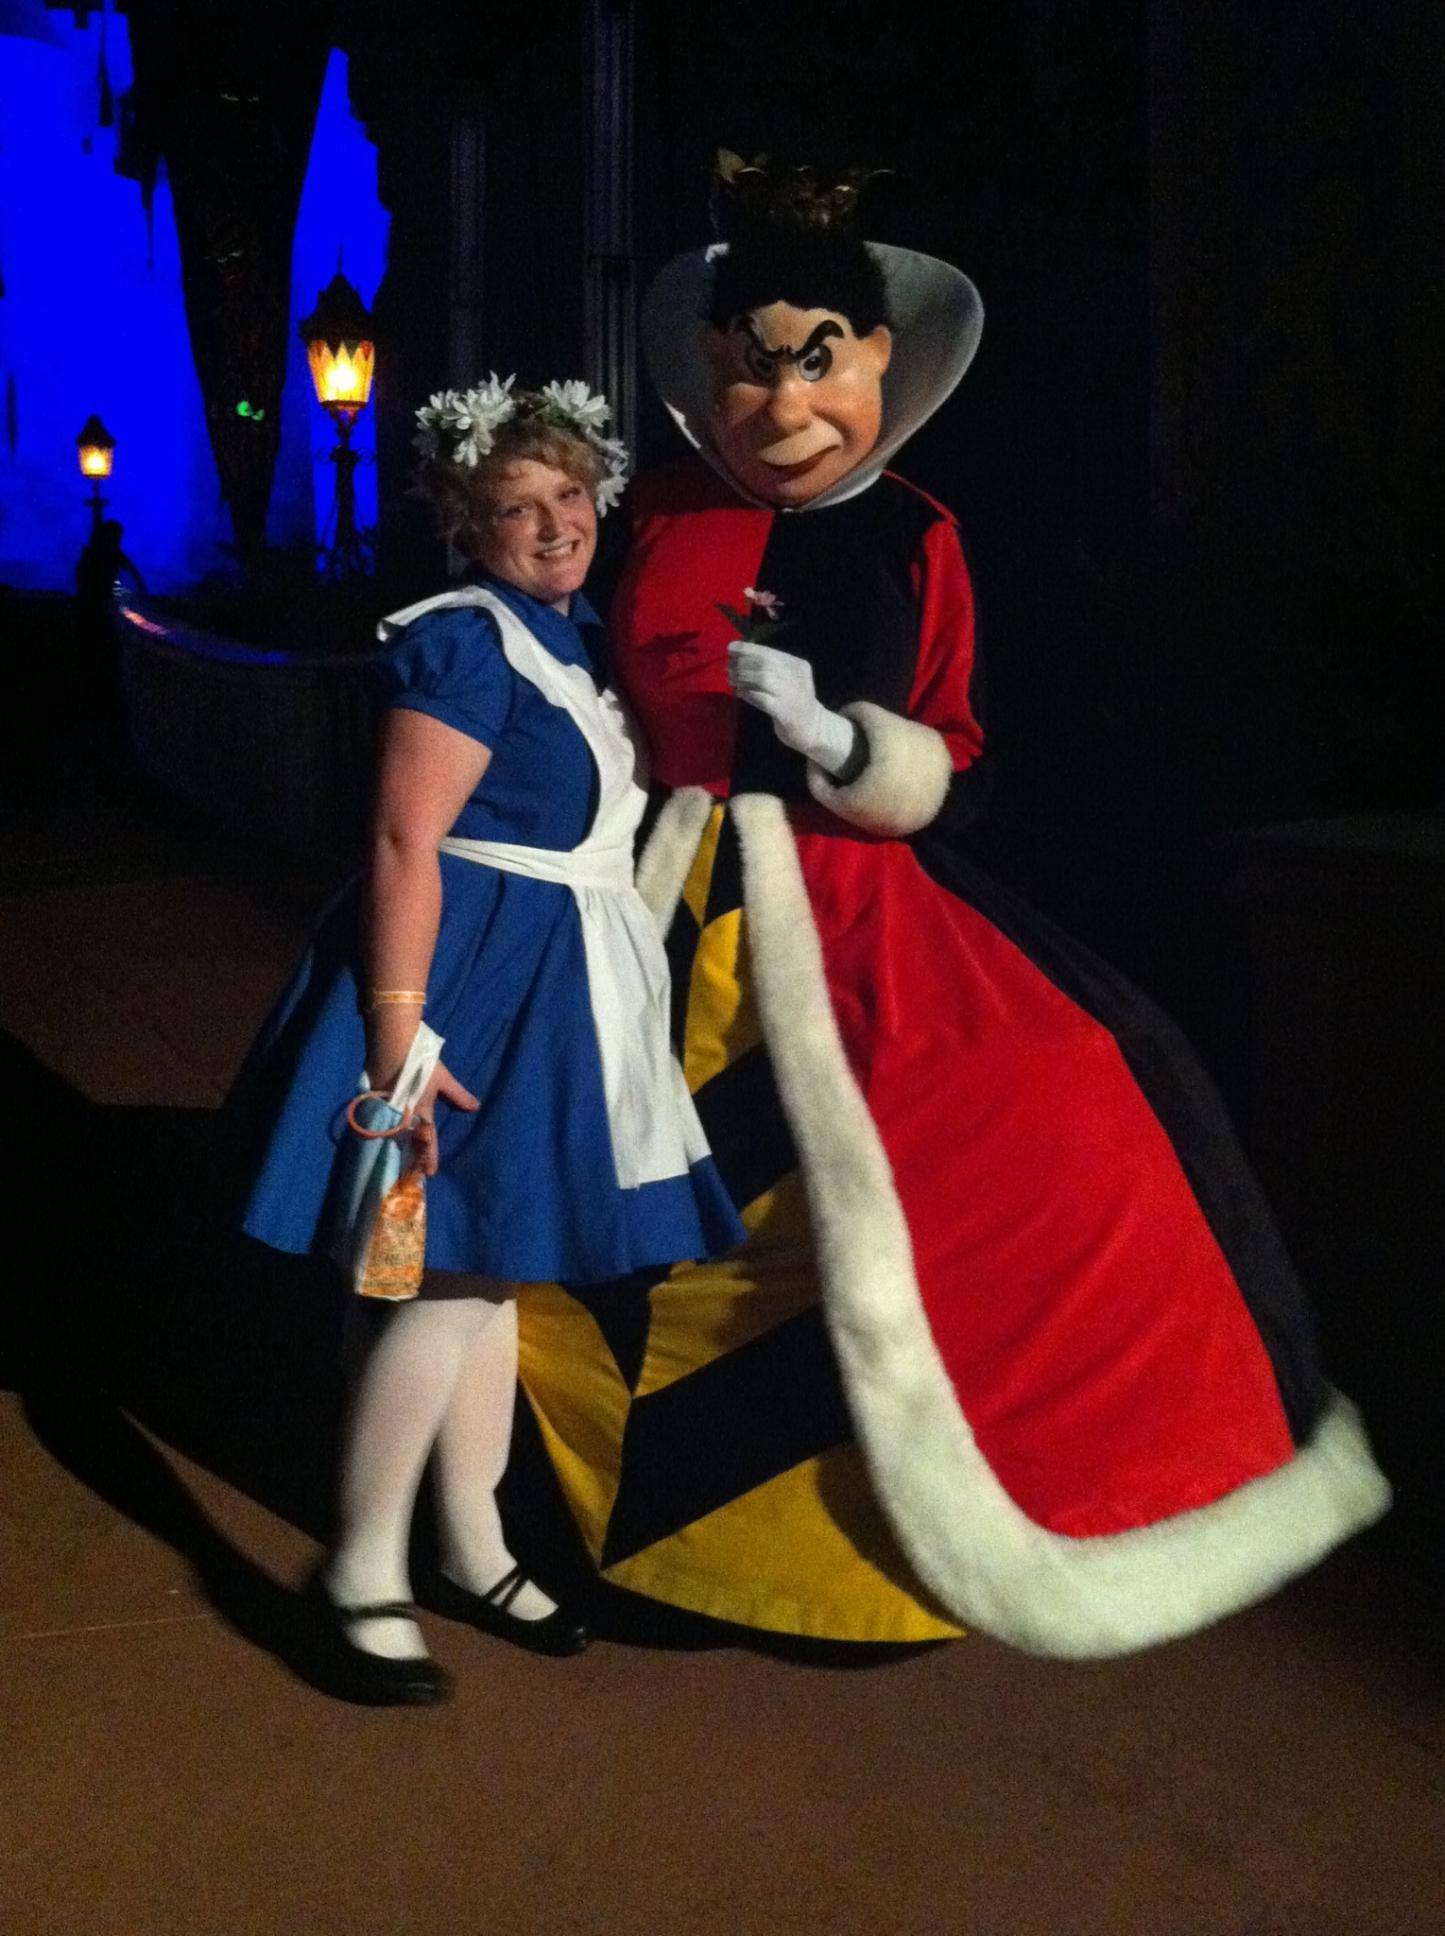 Alice In Wonderland, Queen of Hearts, Magic Kingdom, Mickey's Not-So-Scary Halloween Party, Going Out The Door